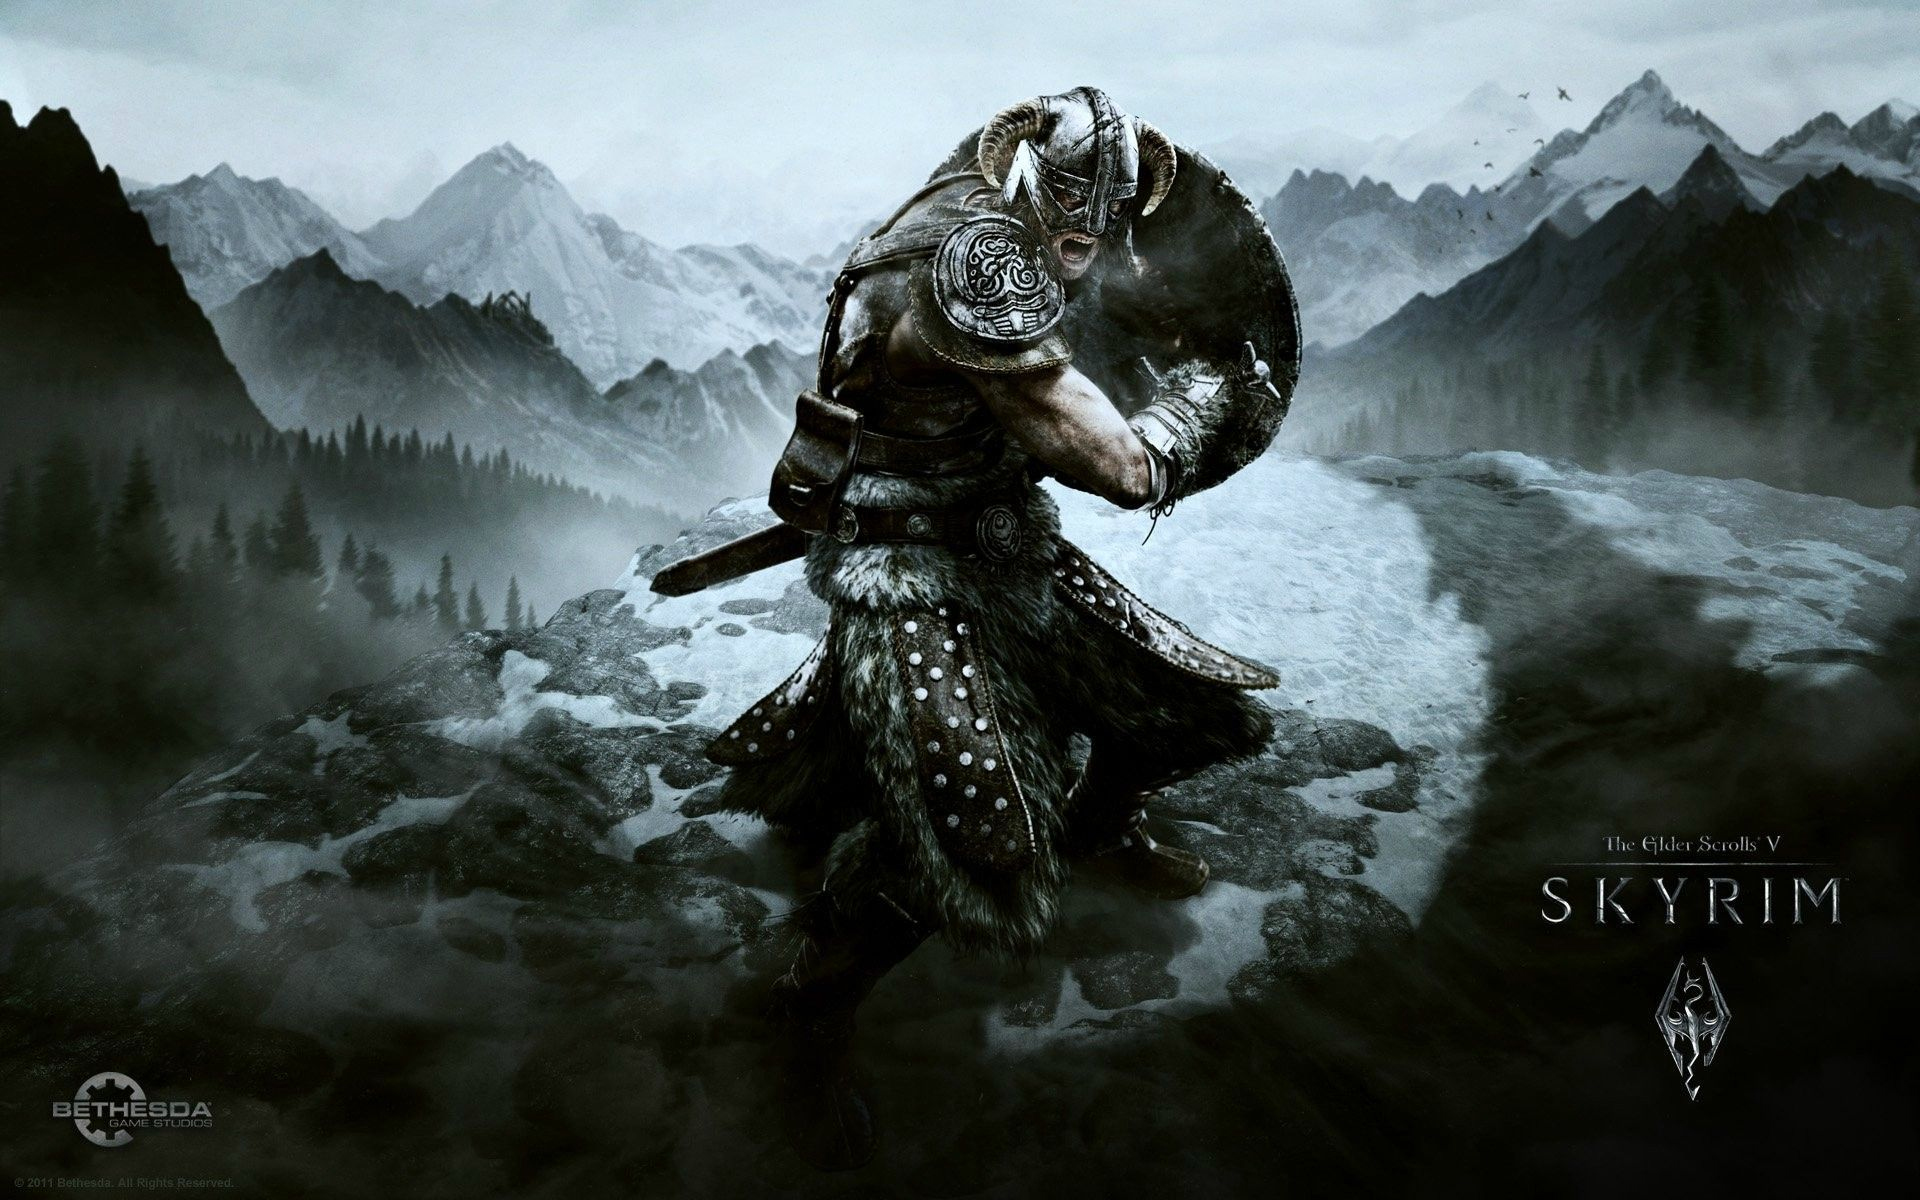 Yes, it's the 2011 game - TES Skyrim, remade by fans to look better than any PS4 or XBONE game to date.